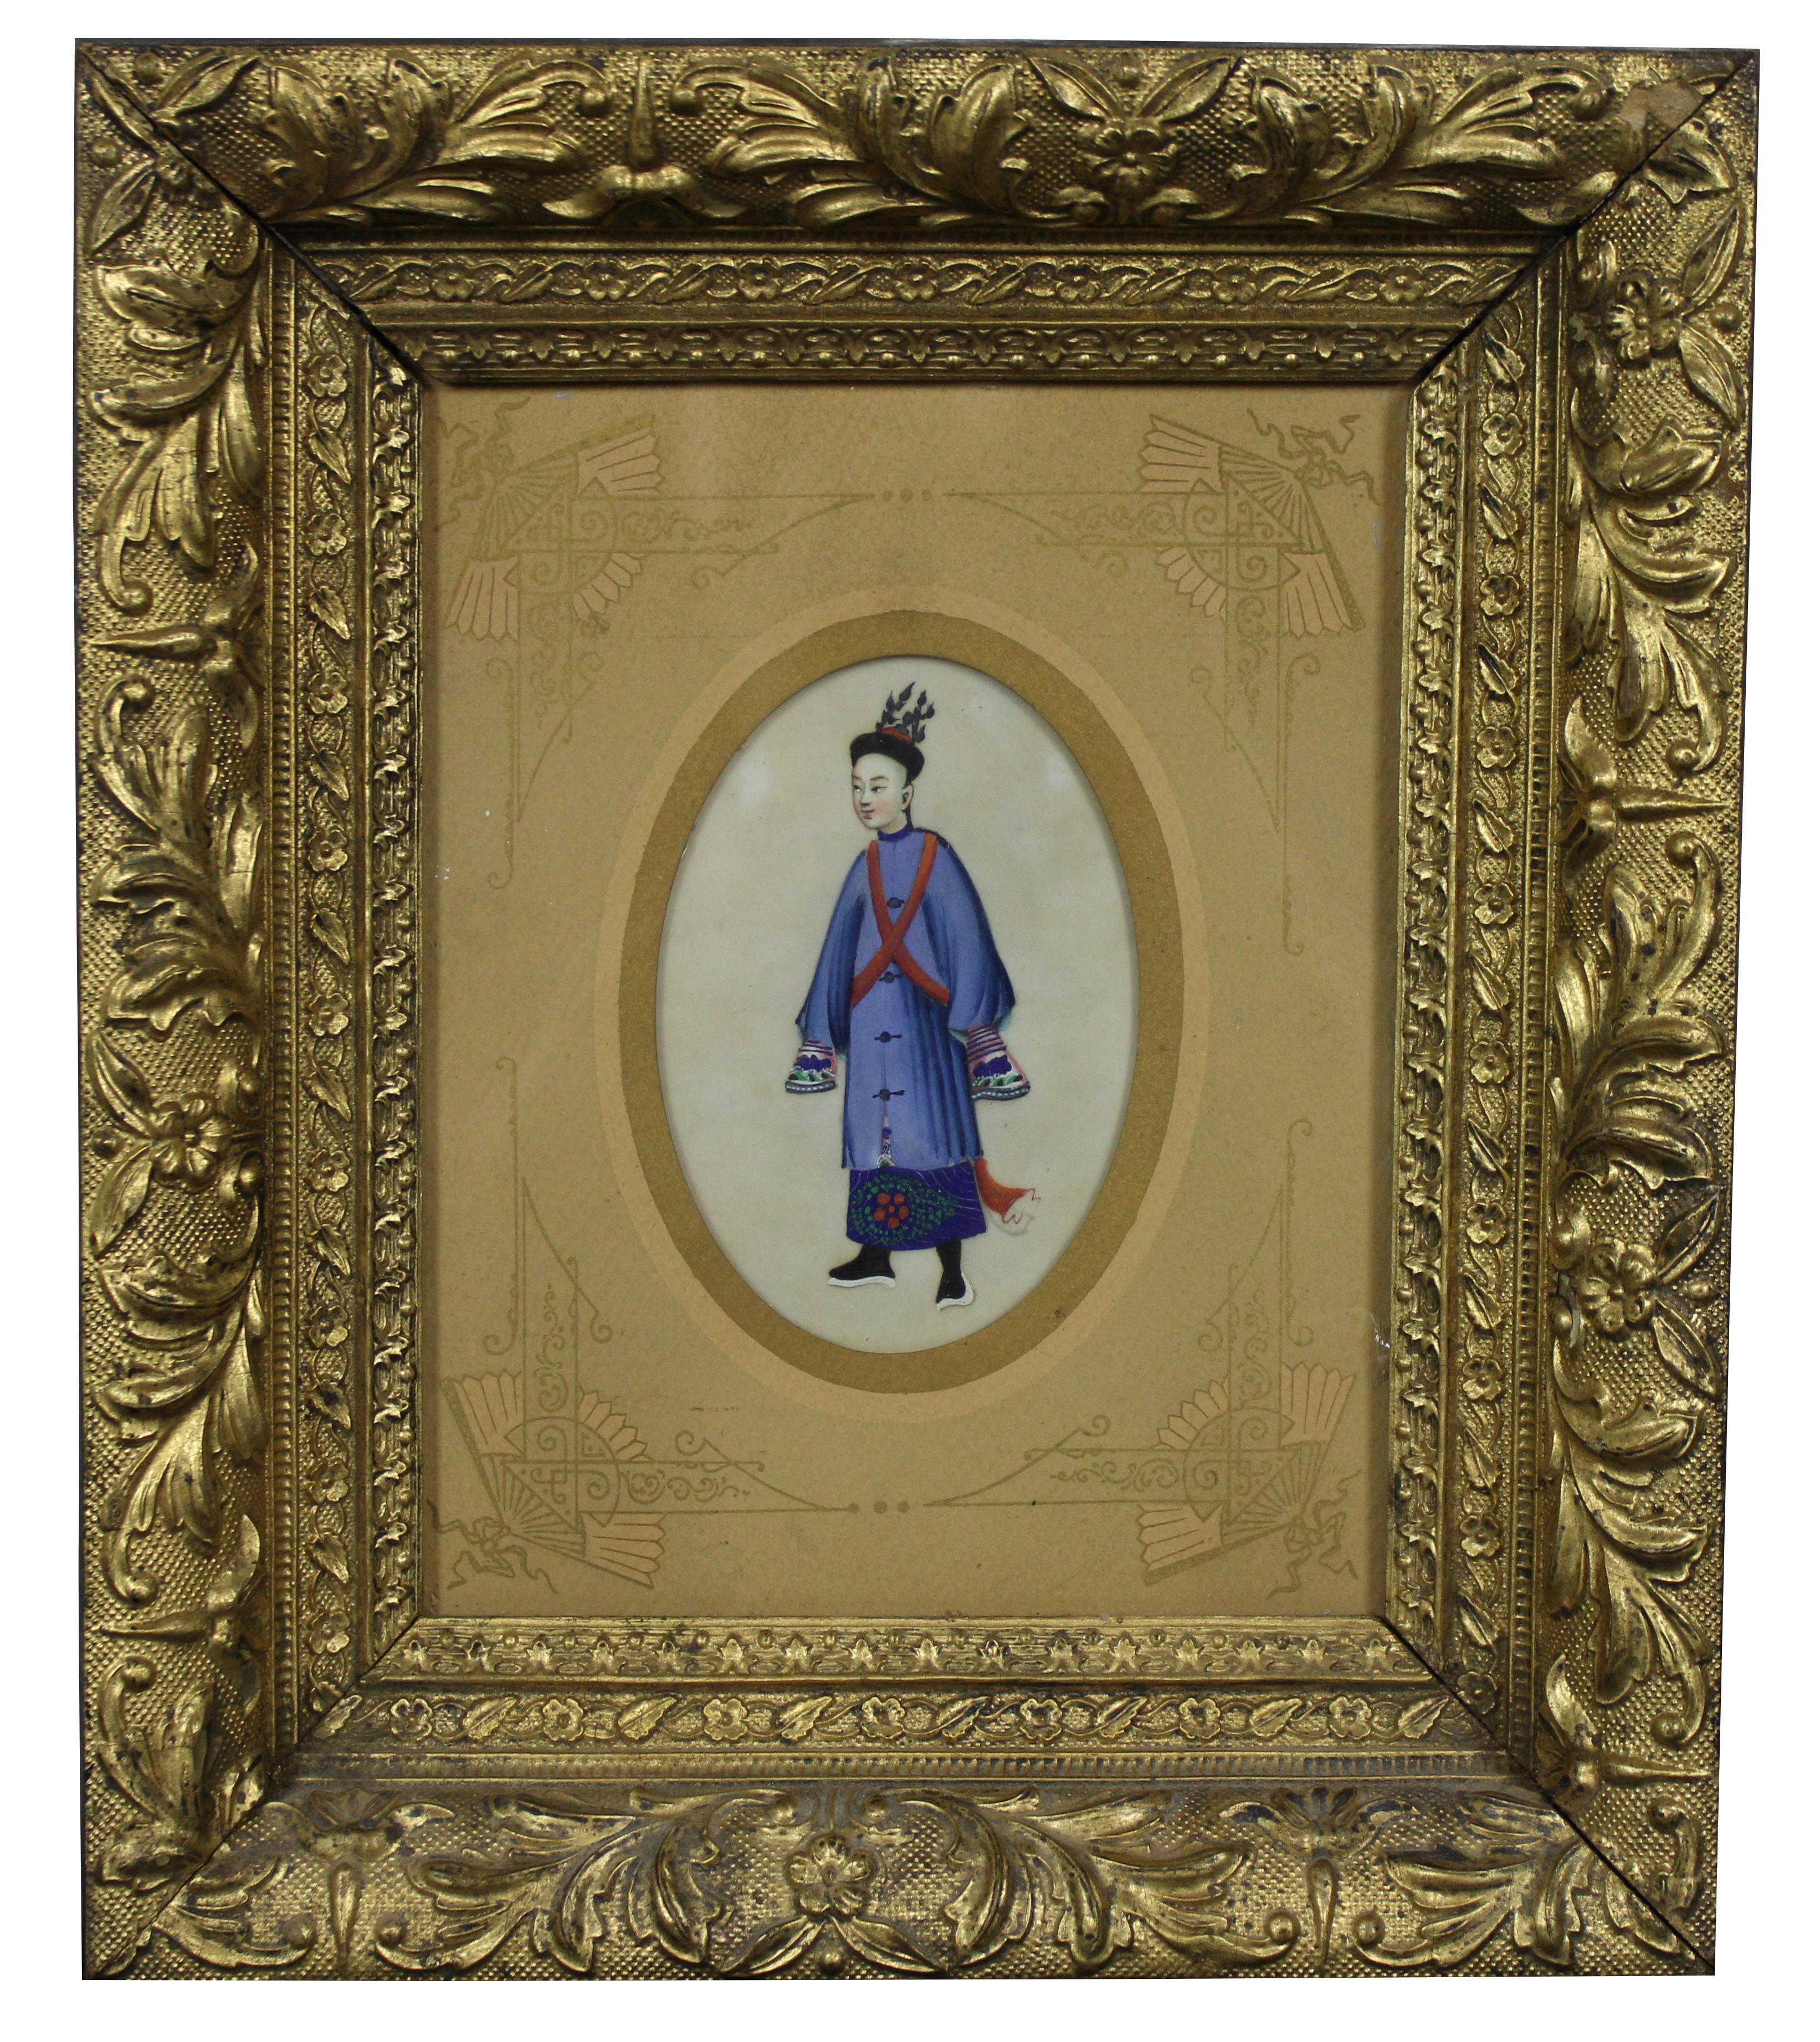 Antique Chinese Export rice paper pith watercolor paintings. Featuring a man and woman in blue robes; framed in deeply beveled floral Aesthetic Period giltwood frames.

Measures: 12.5” x 2.25” x 14.5” / Sans Frame - 3.5” x 5.5” (Width x Depth x